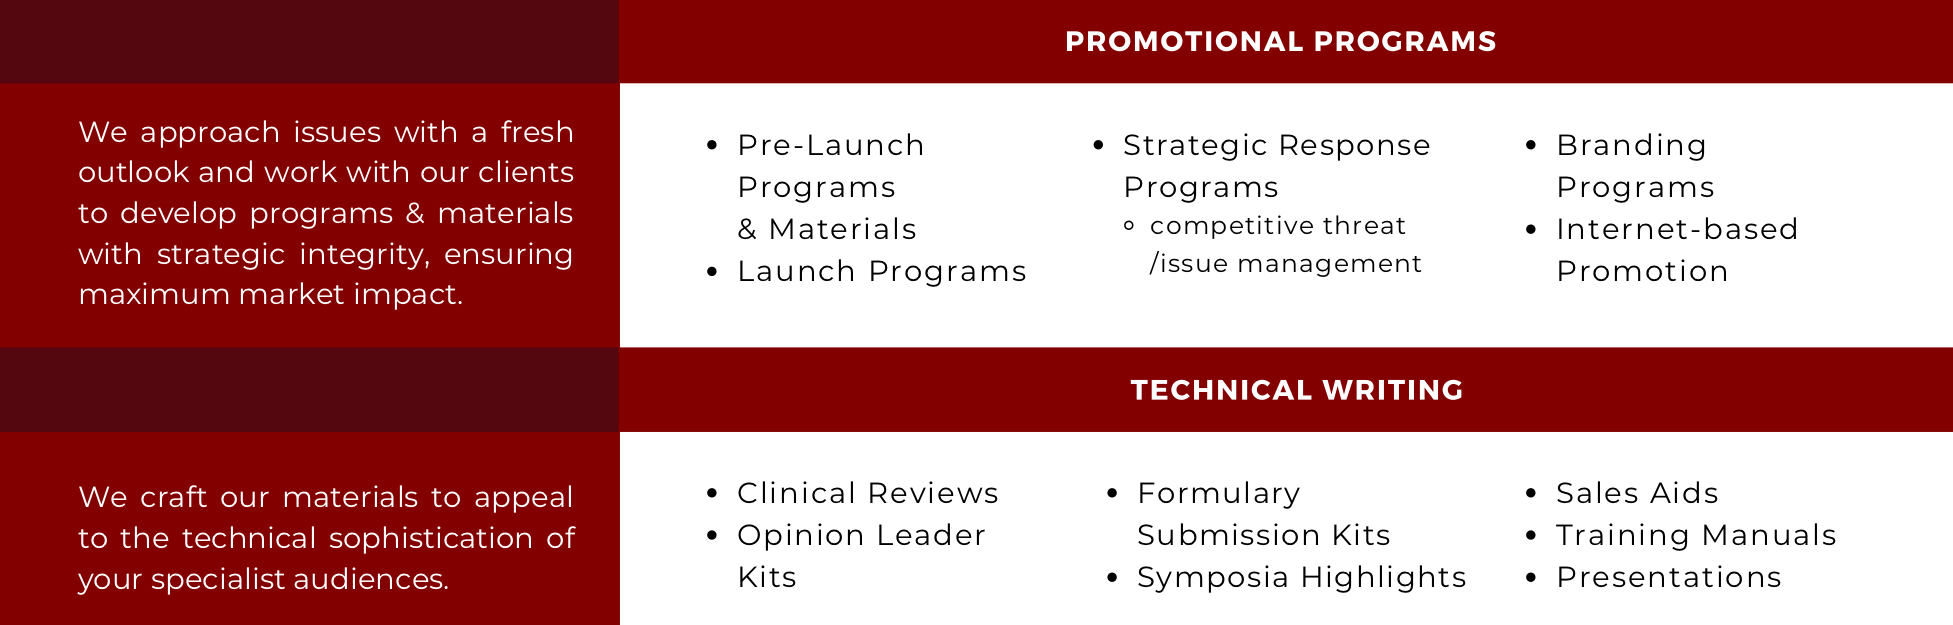 Promotional Programs. Pre-launch programs & materials, launch programs, strategic response programs - competitive threat/issue management, branding programs, internet-based promotion. Technical Writing. Formulary submission kits, symposia highlights, etc.